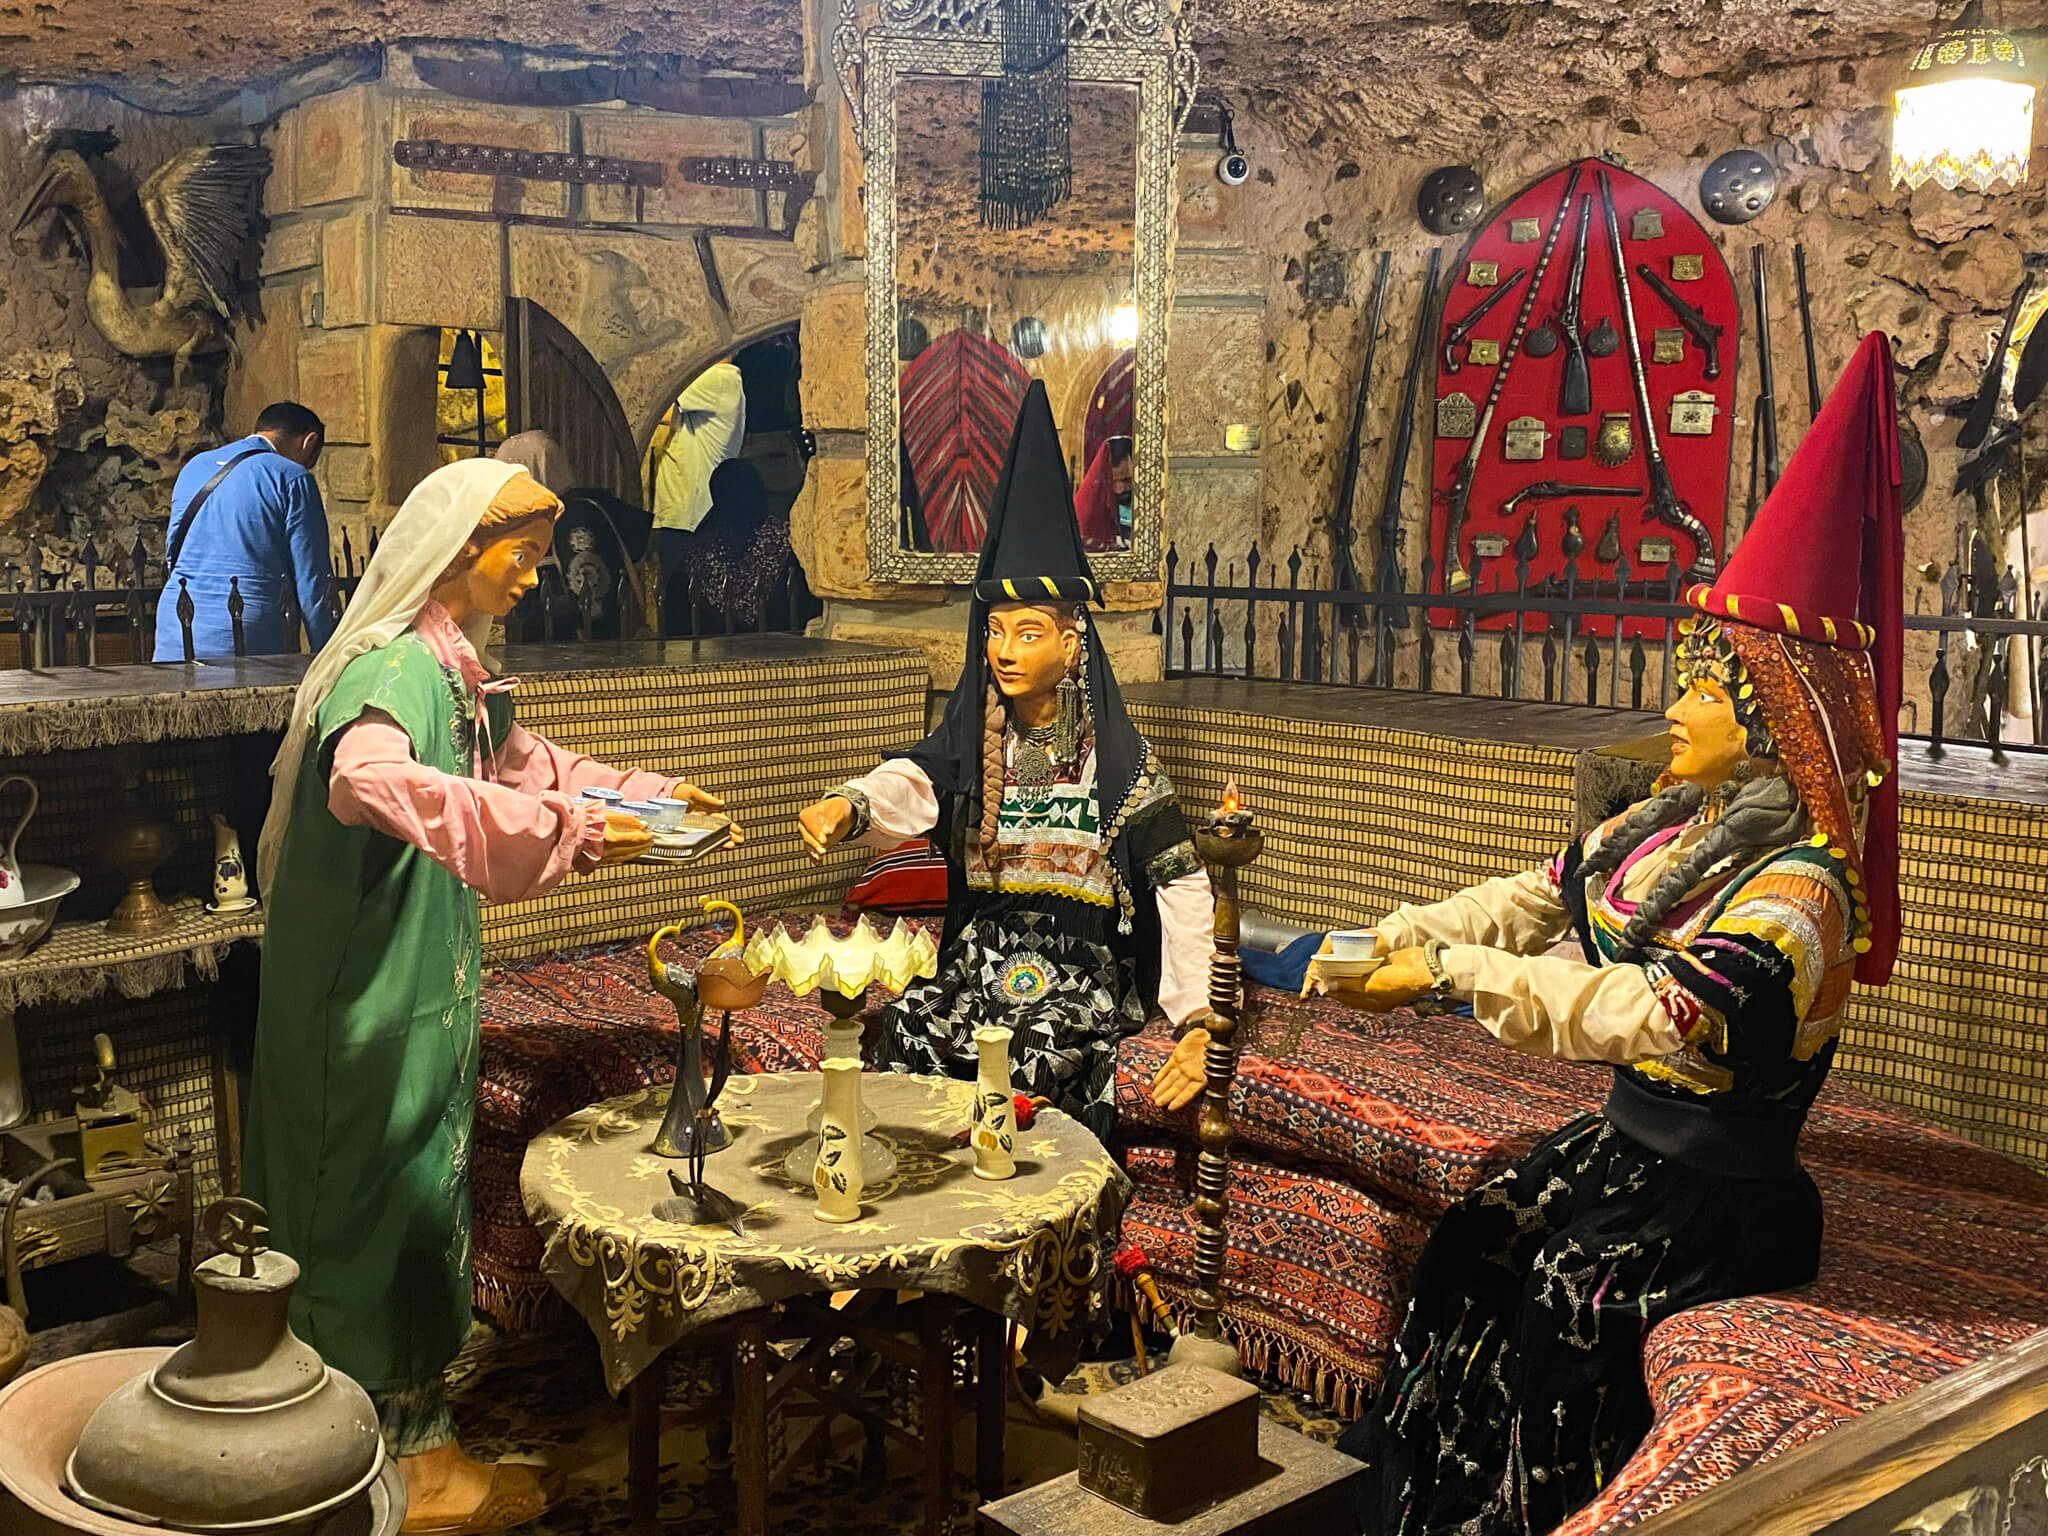 Three mannequins in traditional clothing sit around an old-fashioned table.